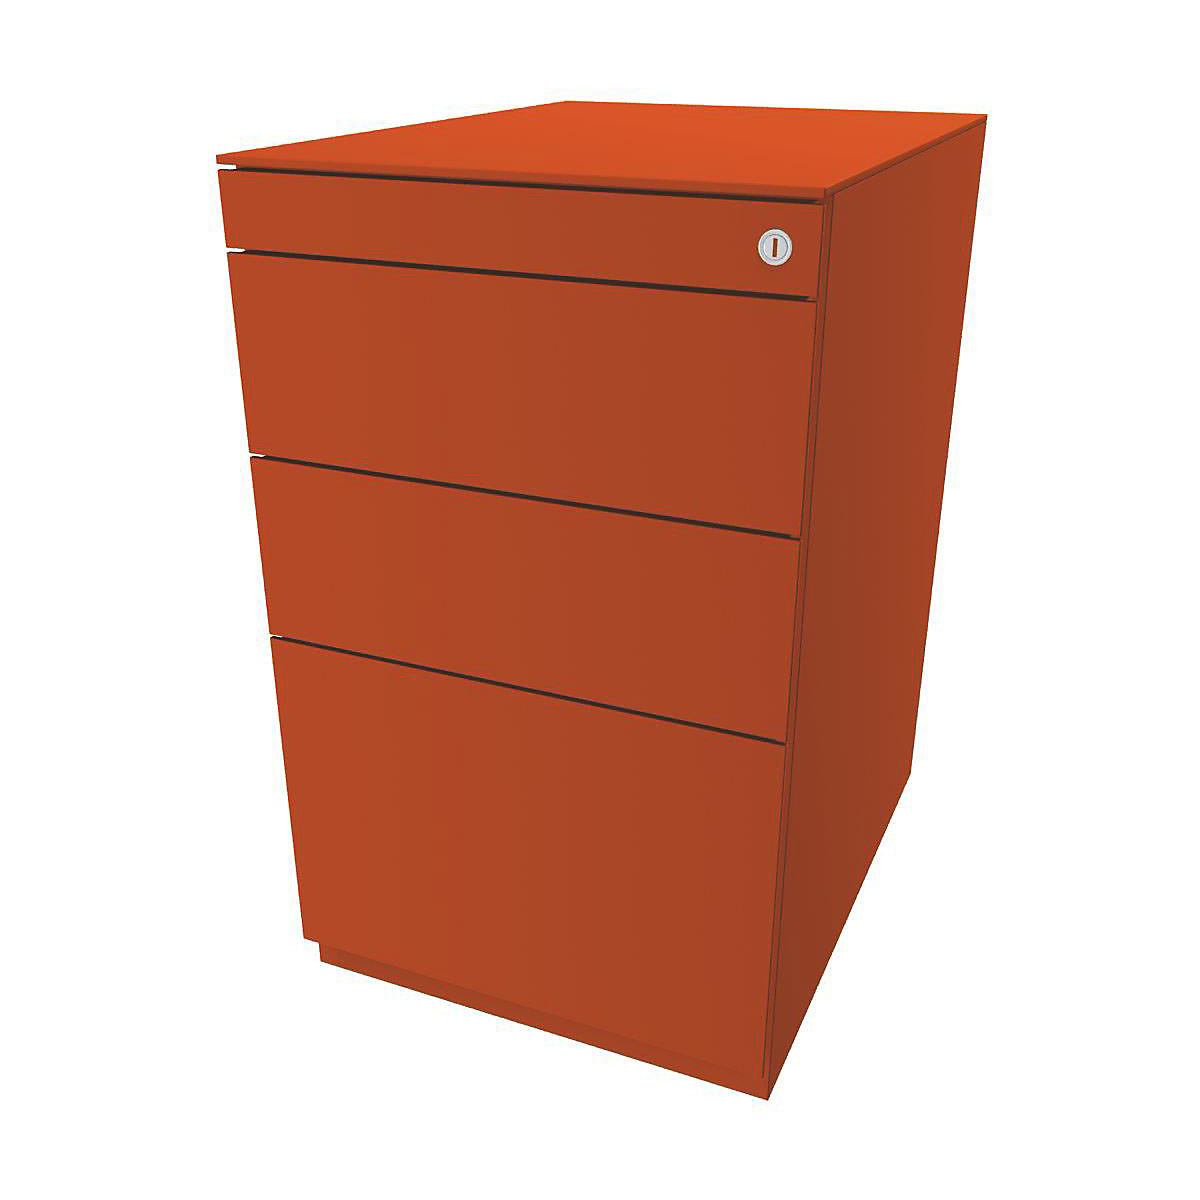 Note™ fixed pedestal, with 2 universal drawers, 1 suspension file drawer – BISLEY, with top, depth 565 mm, orange-12